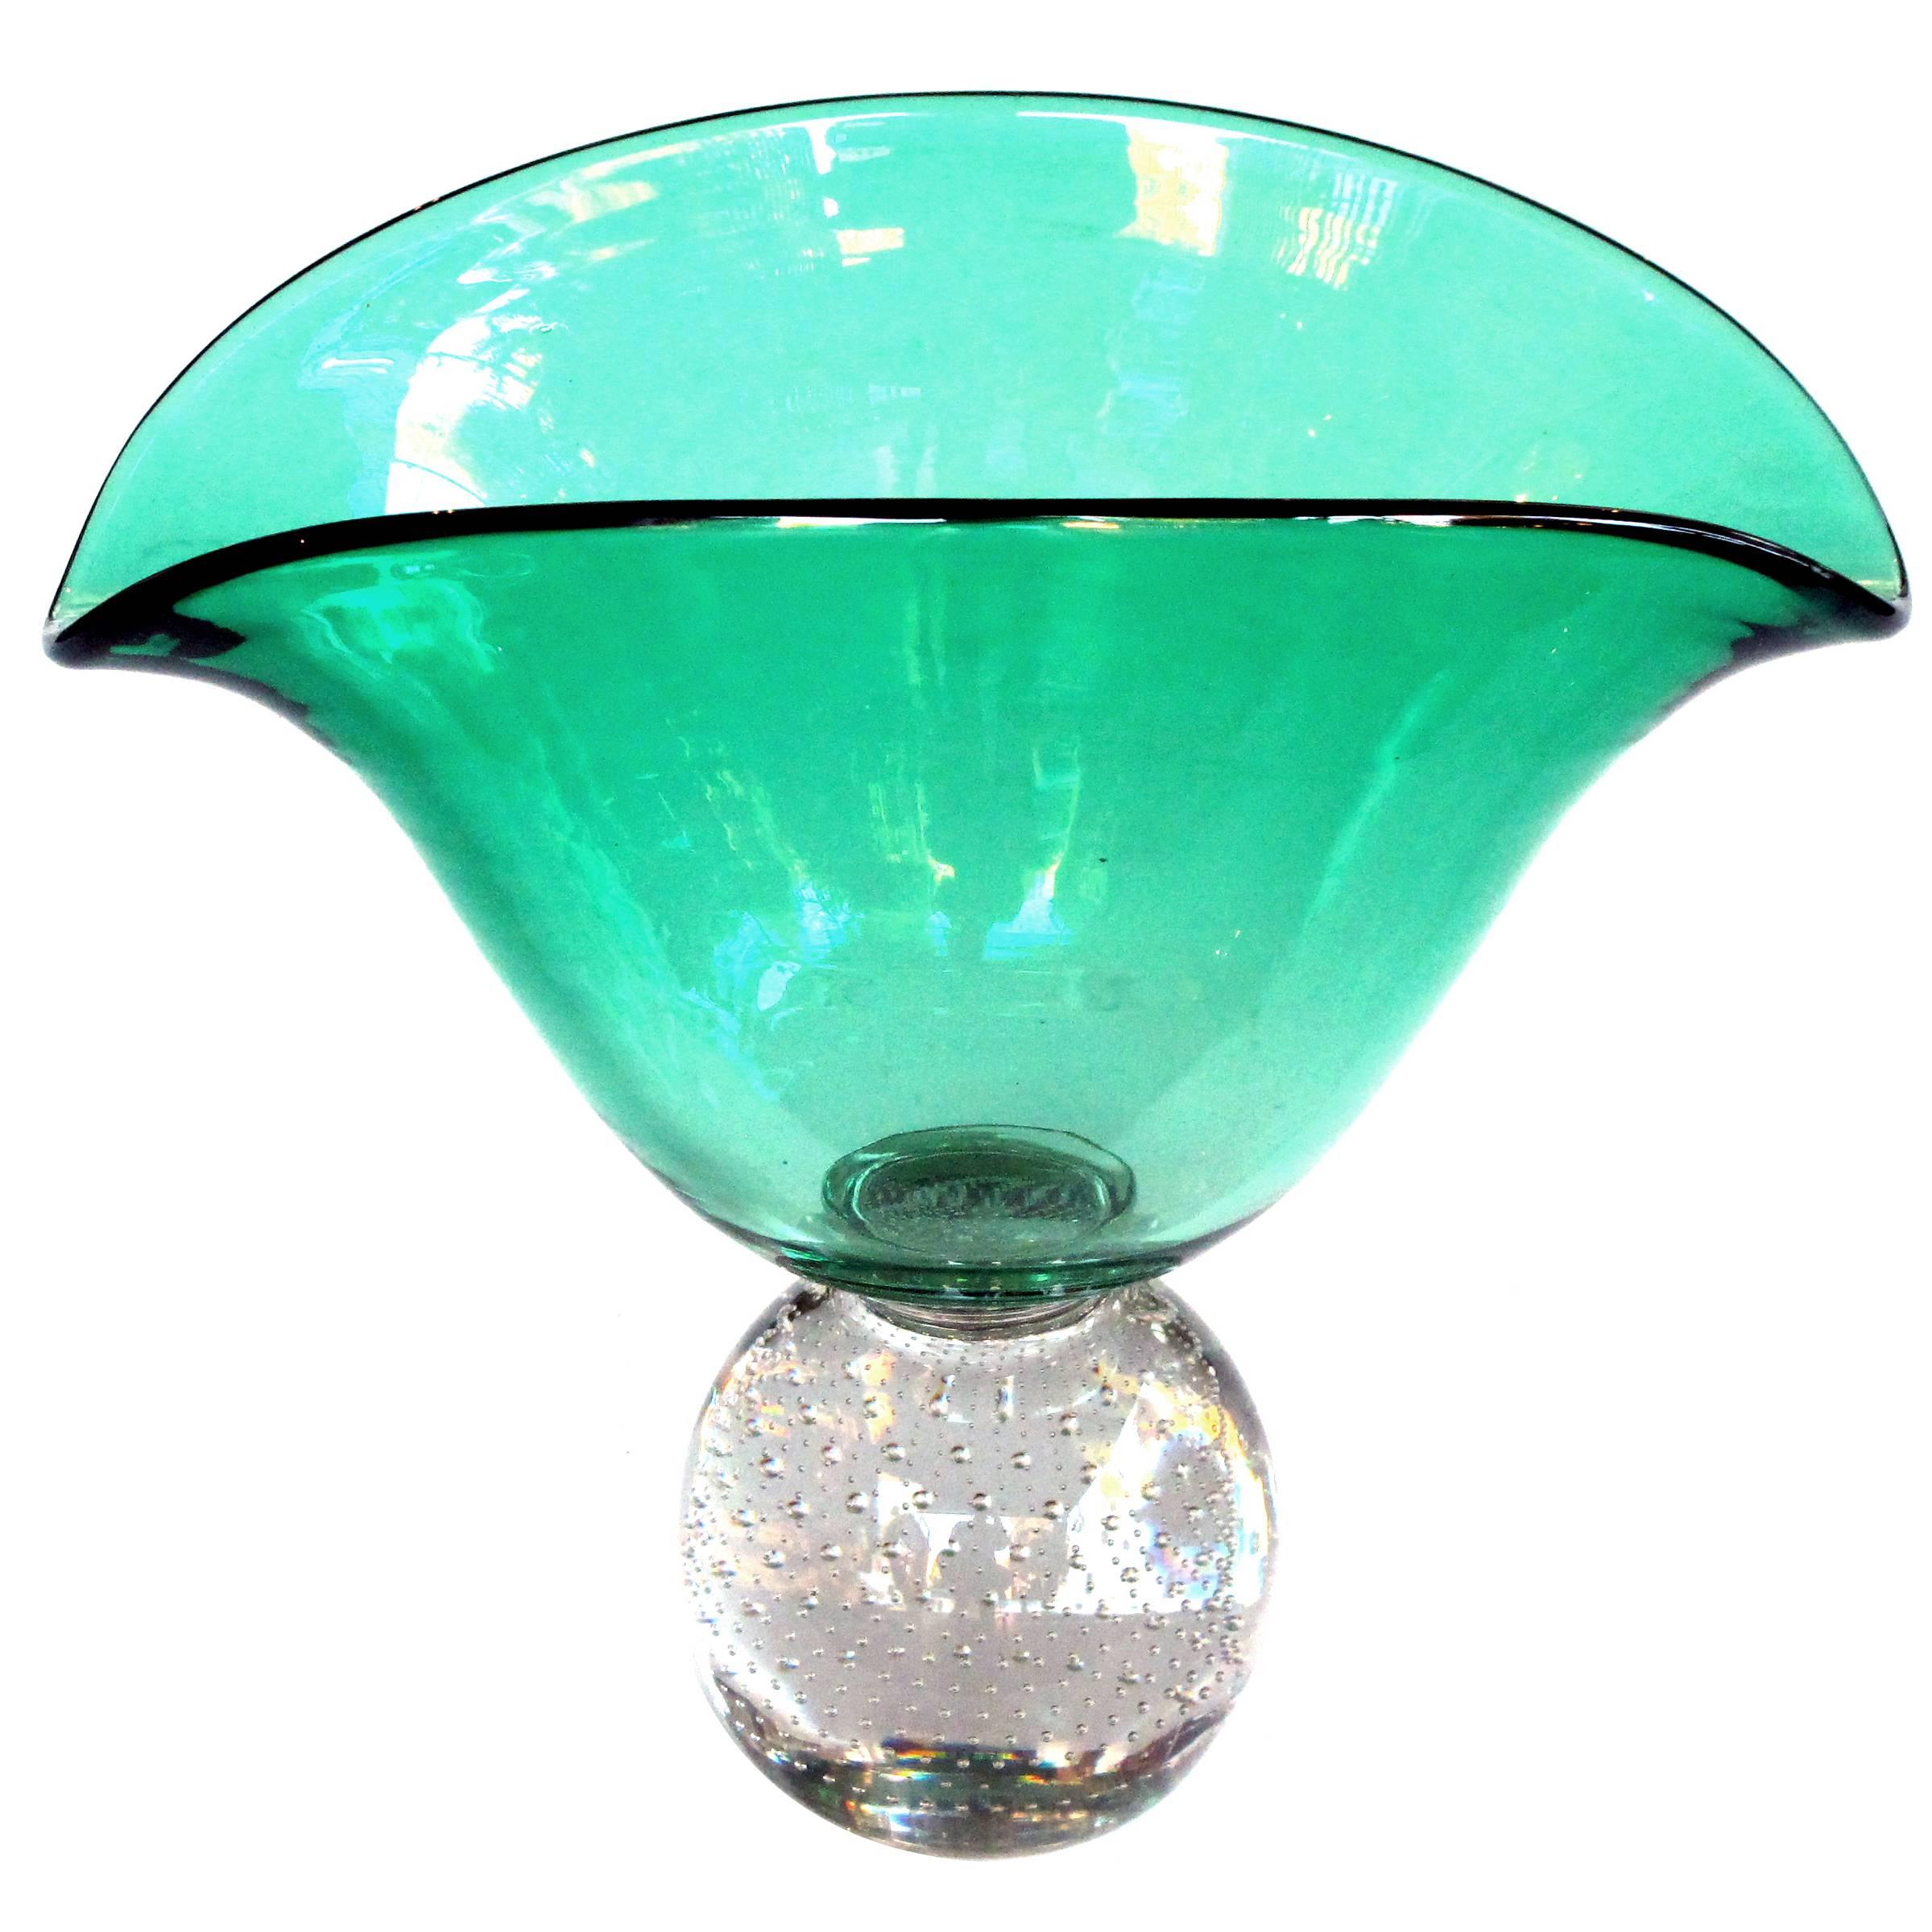 Shapely American Mid-Century Emerald-Green Pedestal Vase; Pairpoint Glassworks